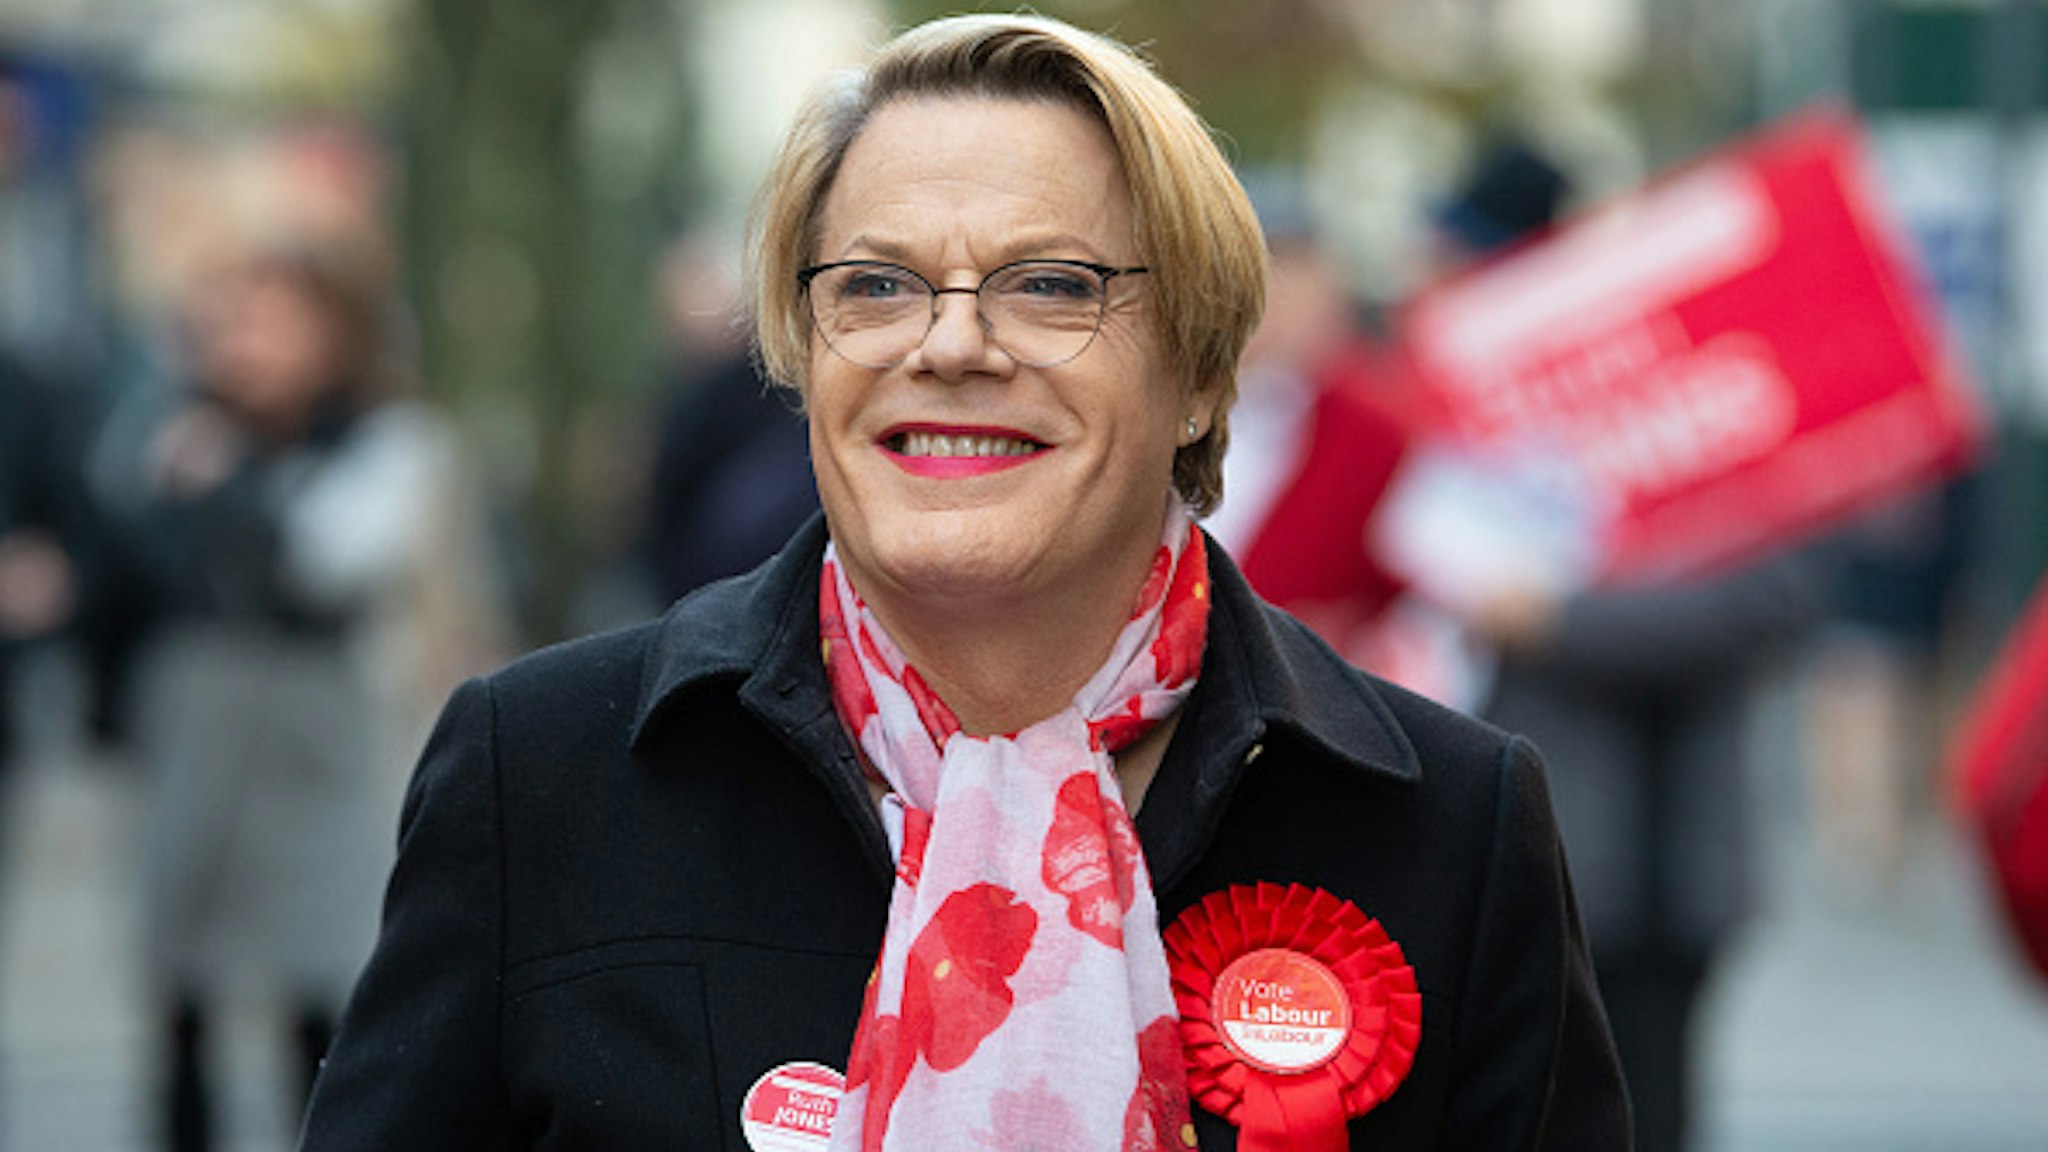 NEWPORT, WALES - DECEMBER 04: Eddie Izzard, comedian and political activist, visits Newport to show support for Ruth Jones, Labour Party candidate for Newport West and Jessica Morden, Labour Party candidate for Newport East on December 4, 2019 in Newport, Wales. The UK will go to the polls on December 12, the third General Election in less than five years.